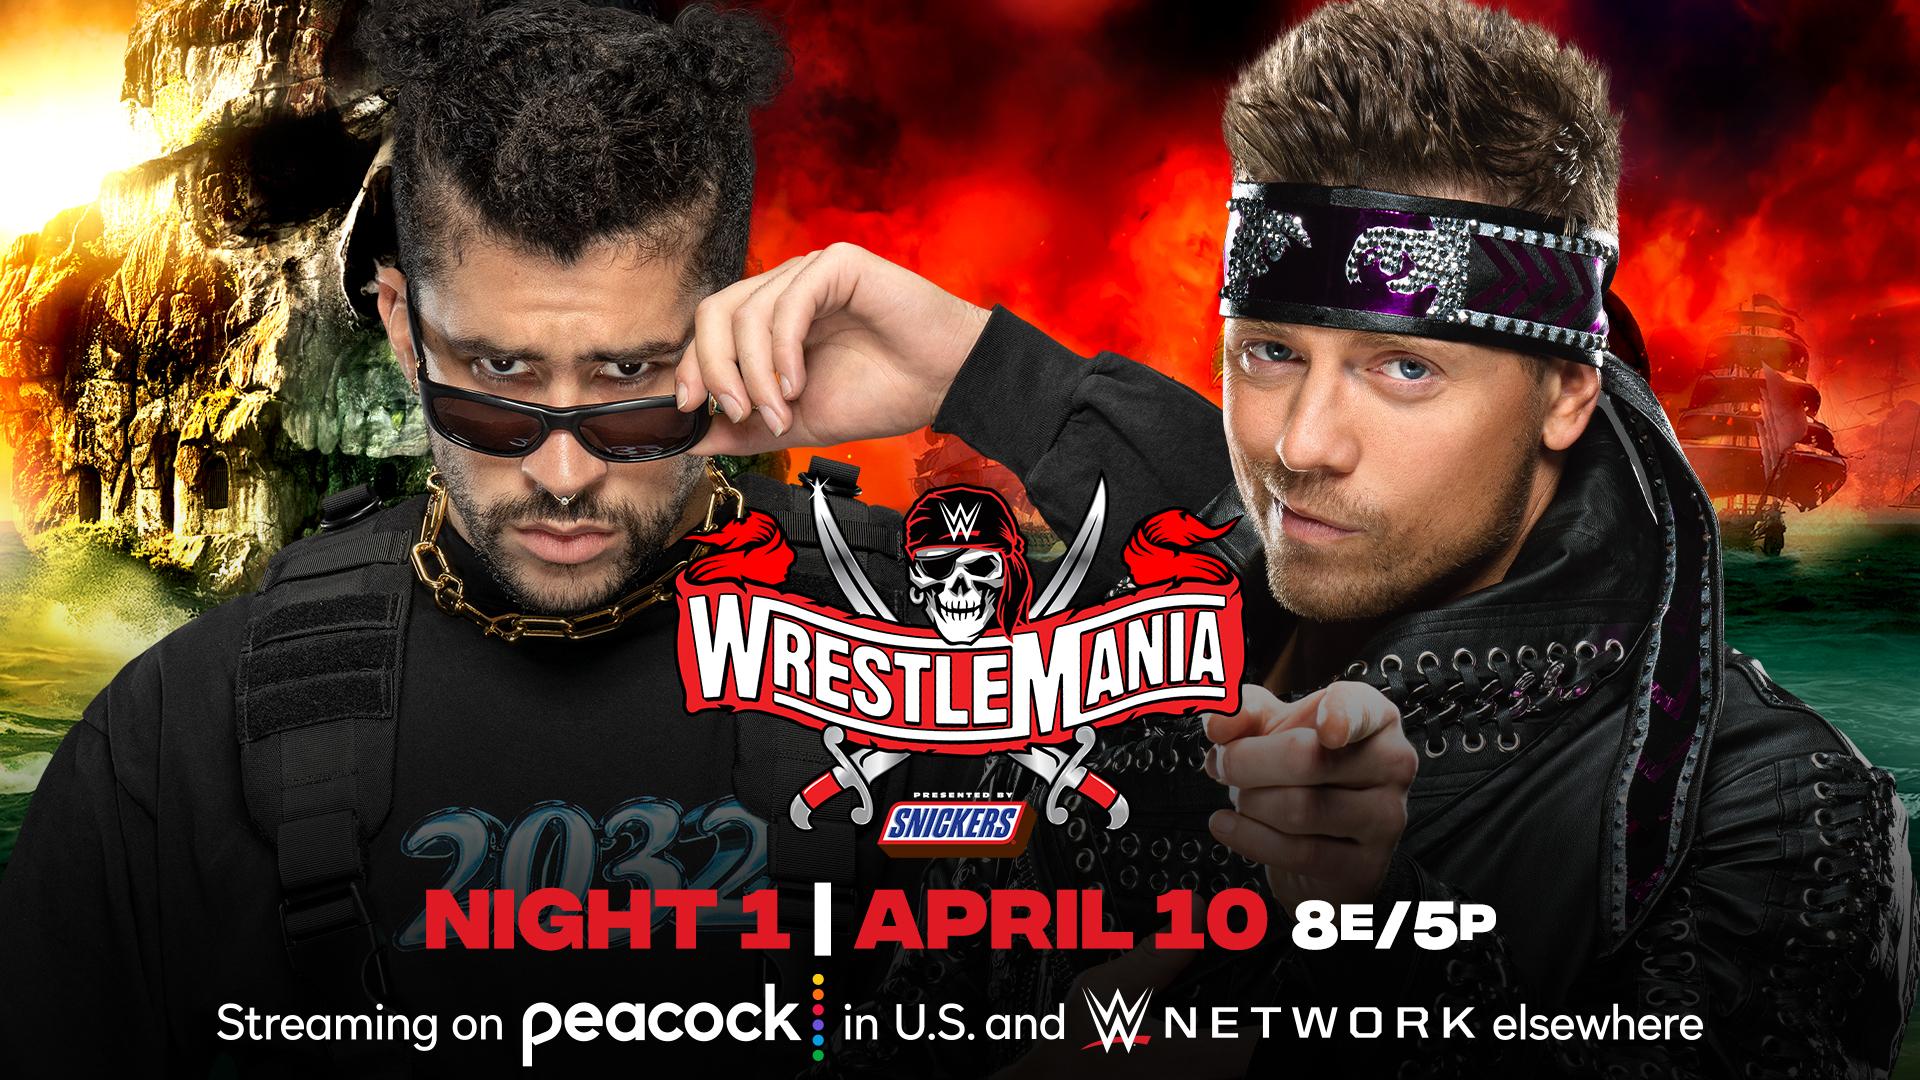 WWE's Wrestlemania 37 poster promoting Bad Bunny's match scheduled for Night 1 on April 10th, 2021.